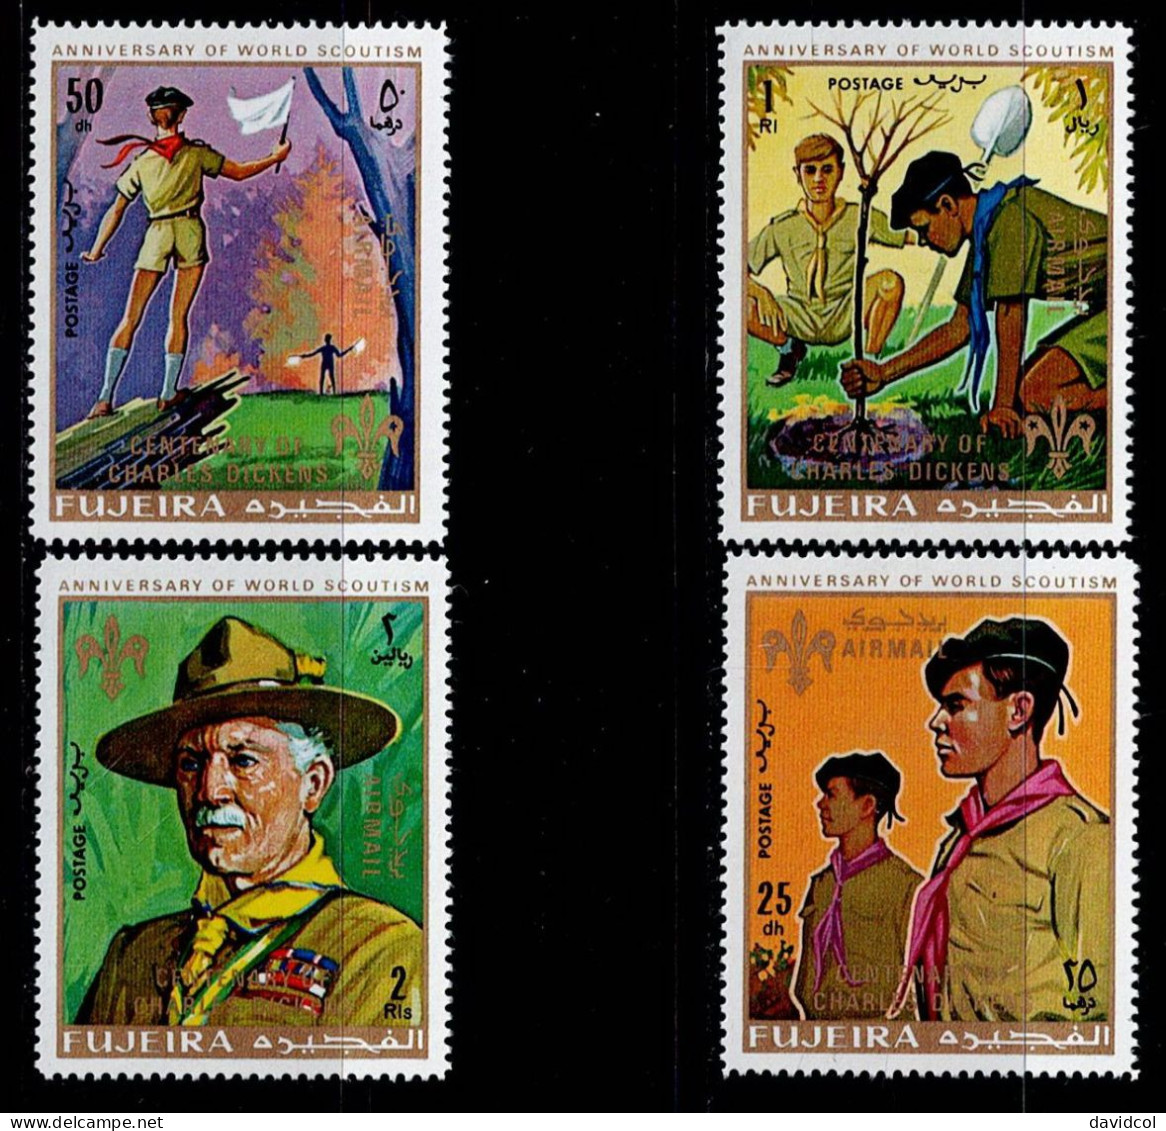 FUJ-03- FUJEIRA - 1970 - MNH -SCOUTS- ANNIVERSARY OF WORLD SCOUTISM-OVERPRINTED CENTENNARY OF CHARLES DICKENS - Fujeira